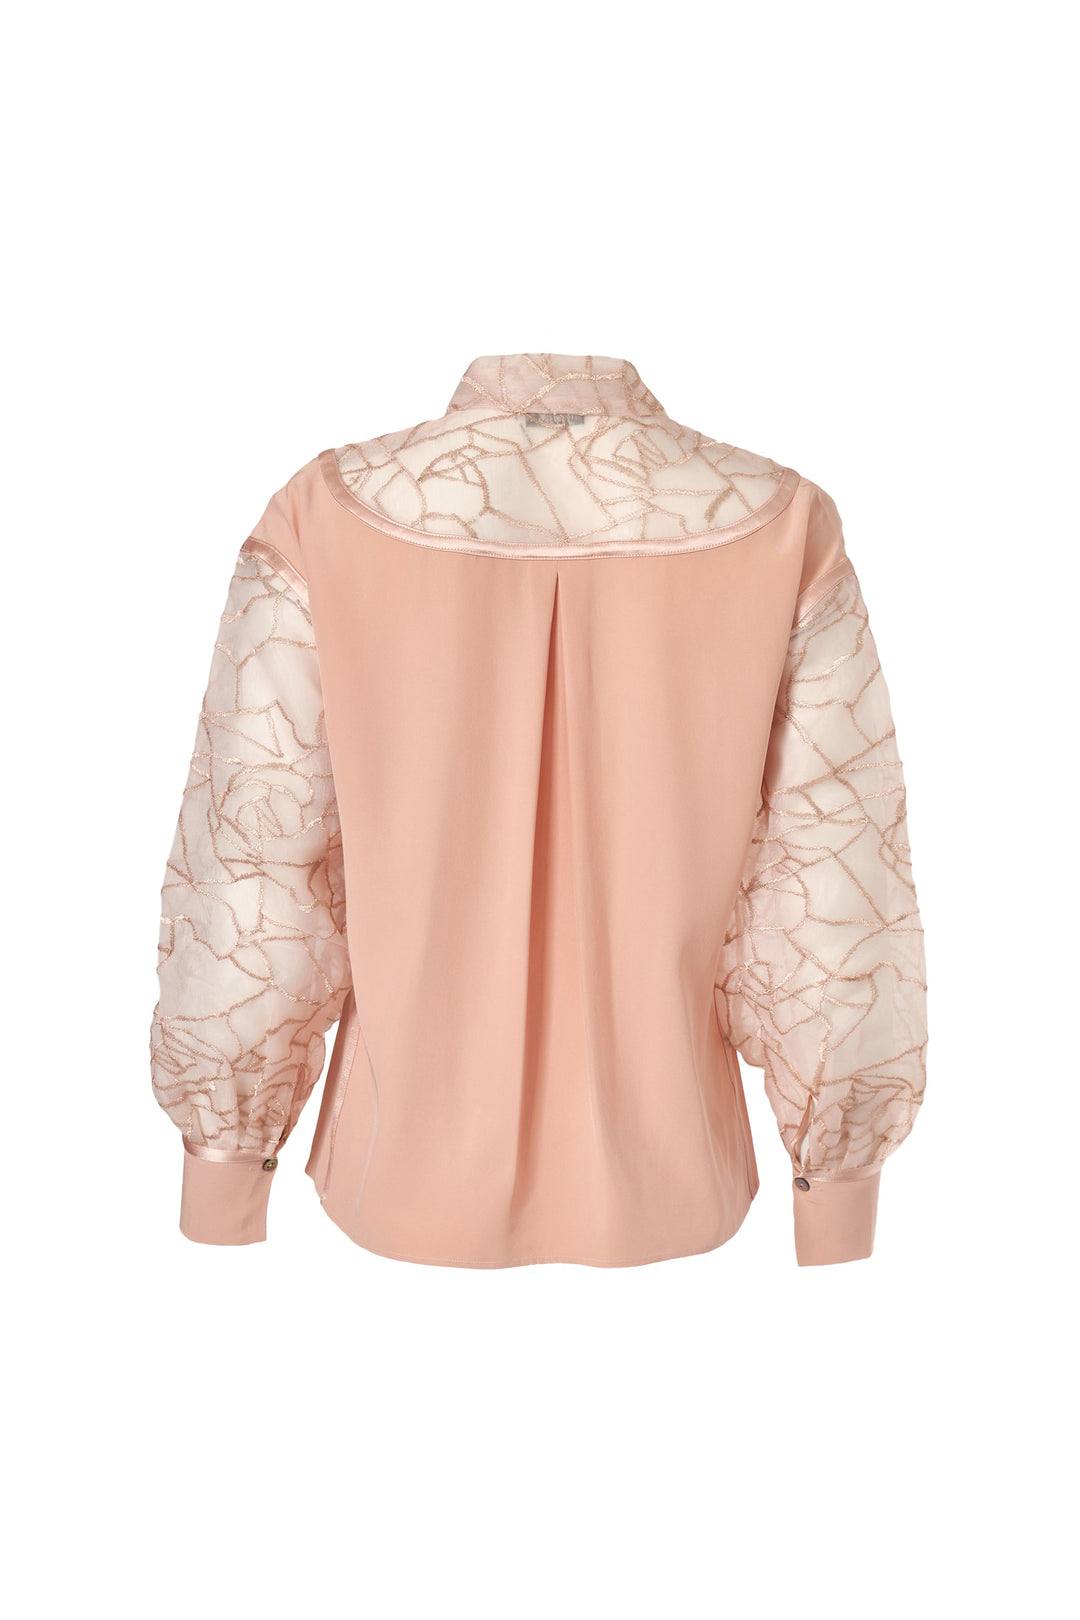 Drop Shoulder Bubble Blouse in Rosy Pink